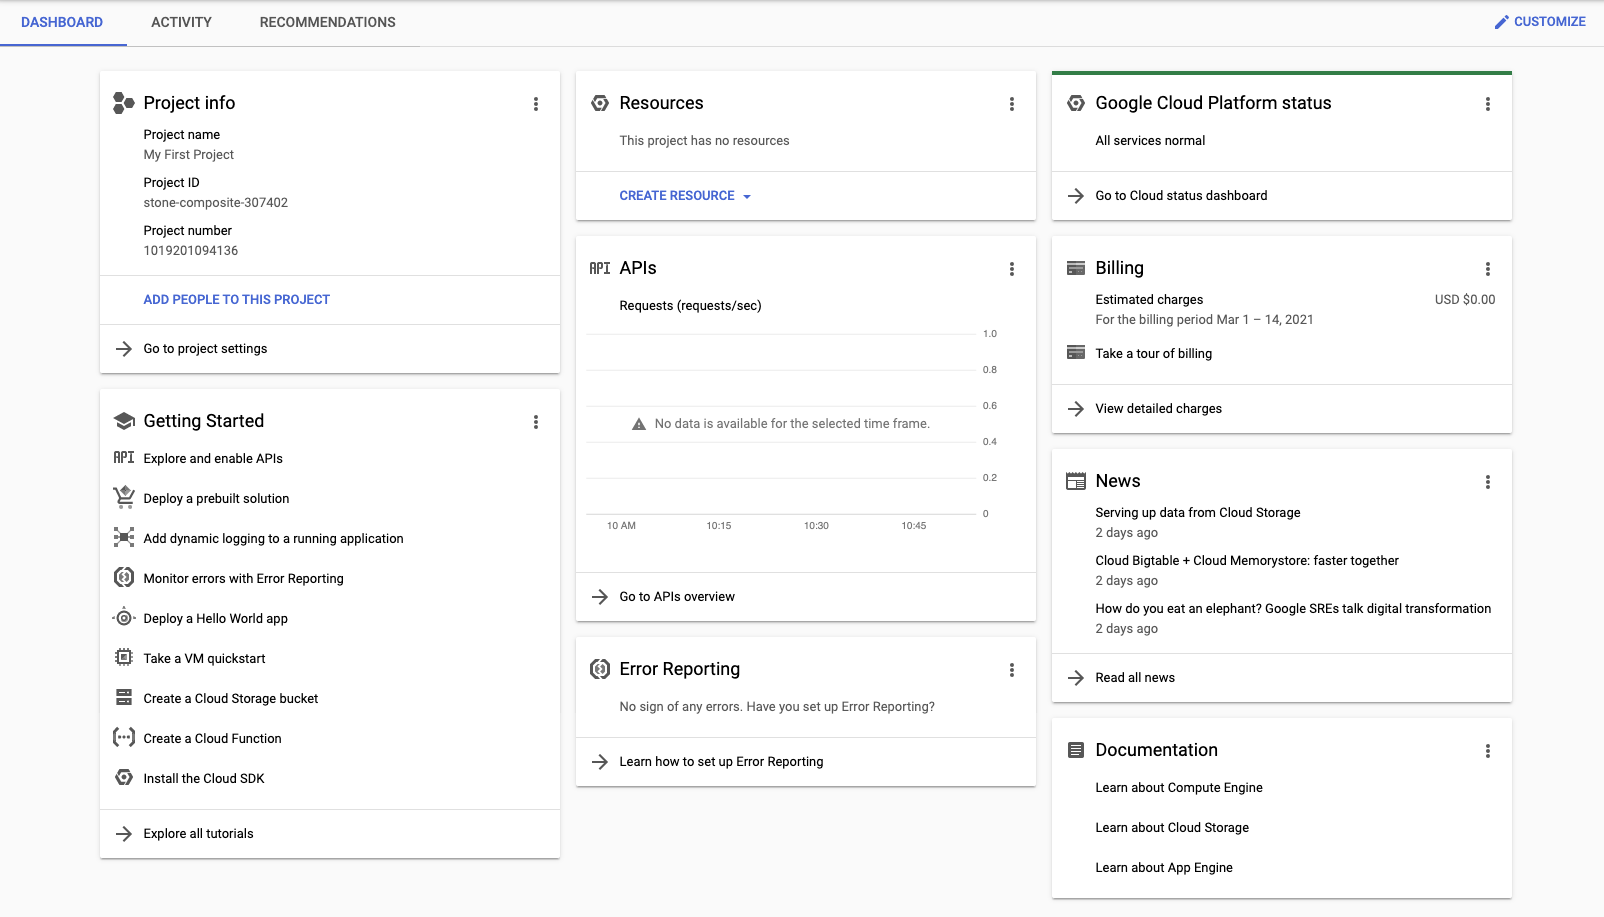 The dashboard provides several customizable widgets that provide you with data related to both the selected project and Google Cloud. Links to Google documentation are also available on the dashboard